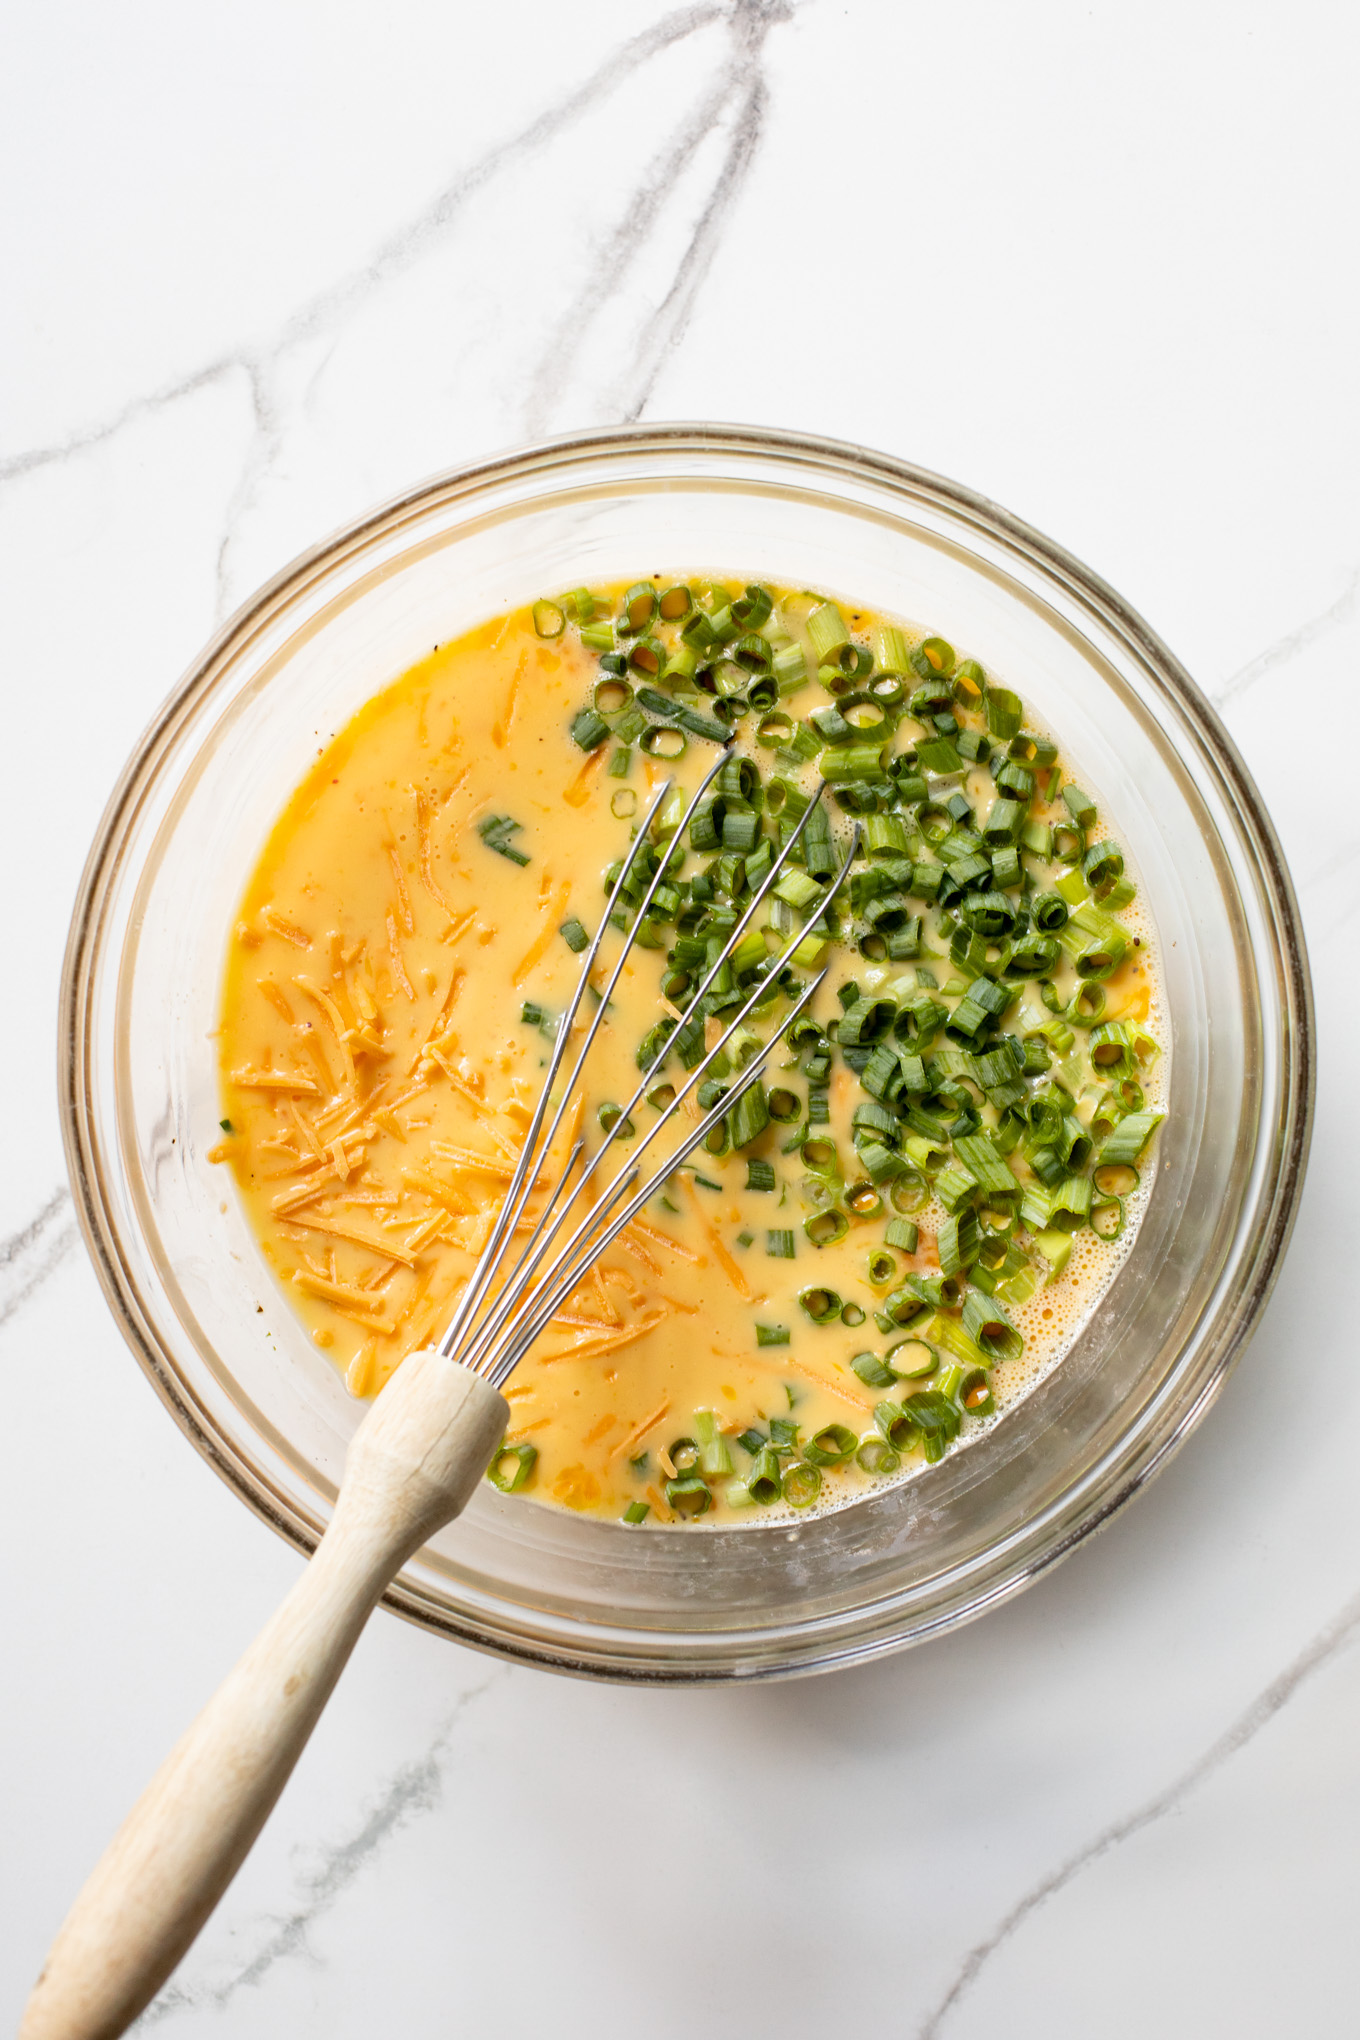 whisked eggs with cheddar cheese and green onions in a bowl.